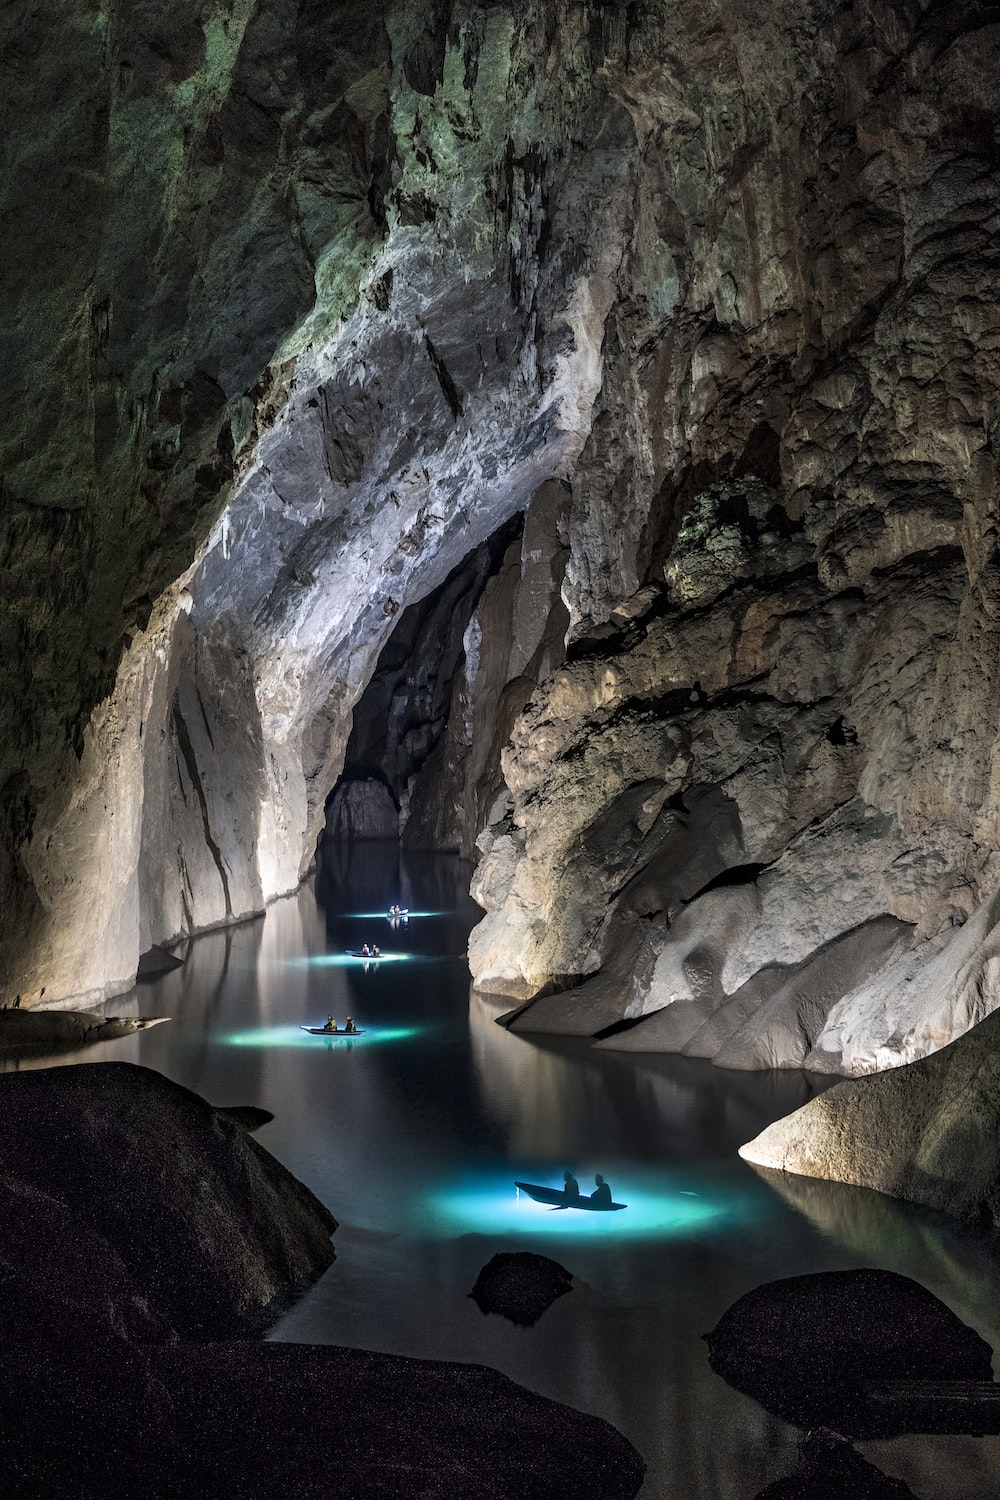 General 1000x1500 nature cave rocks Hang Son Doong Asia Vietnam water portrait display lights boat people stones river reflection